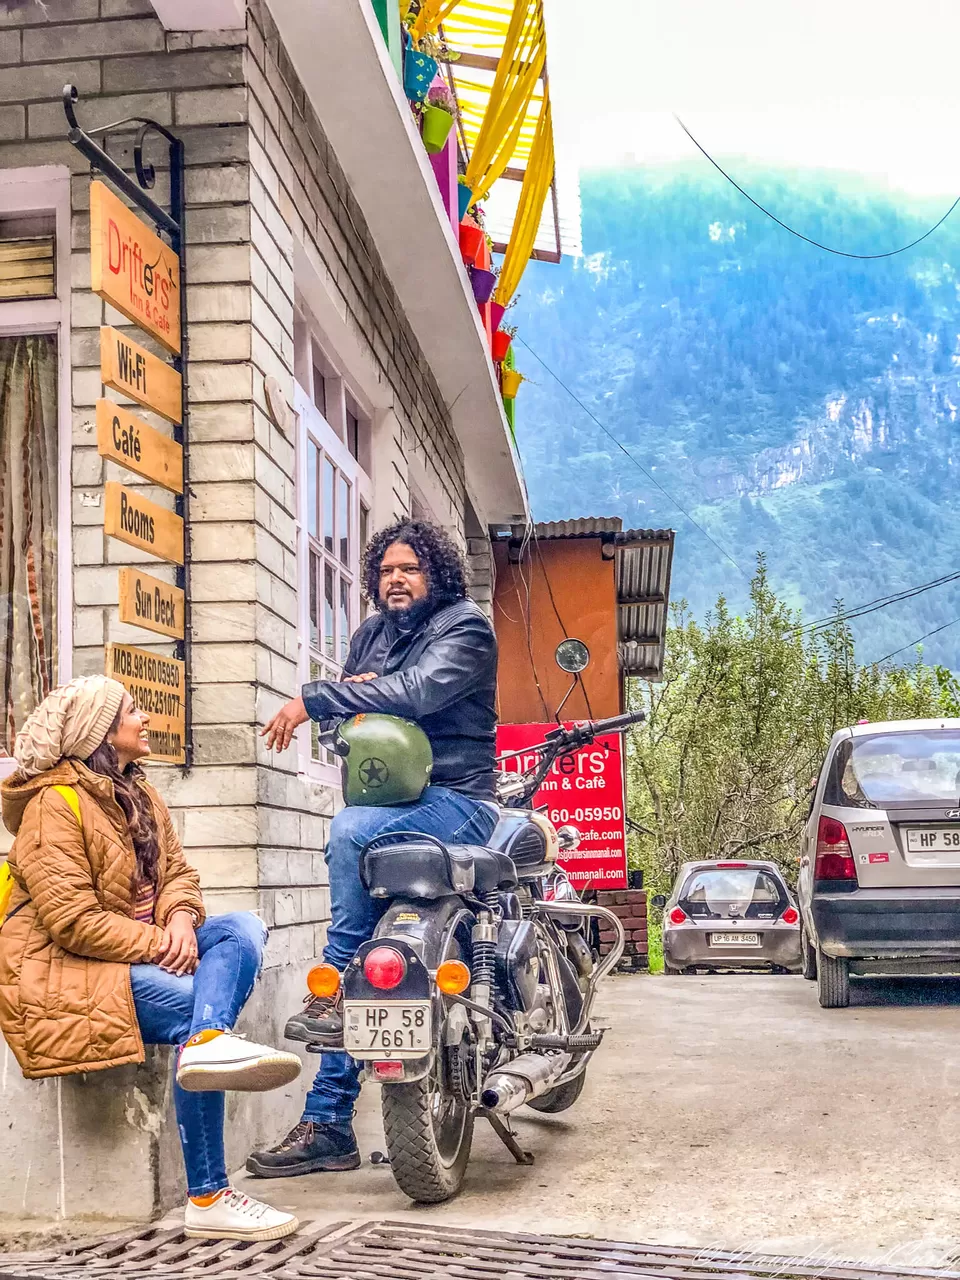 Photo of Drifters' Inn & Cafe, Manu Temple Road, Old Manali, Manali, Himachal Pradesh, India by NaughtyandCurly